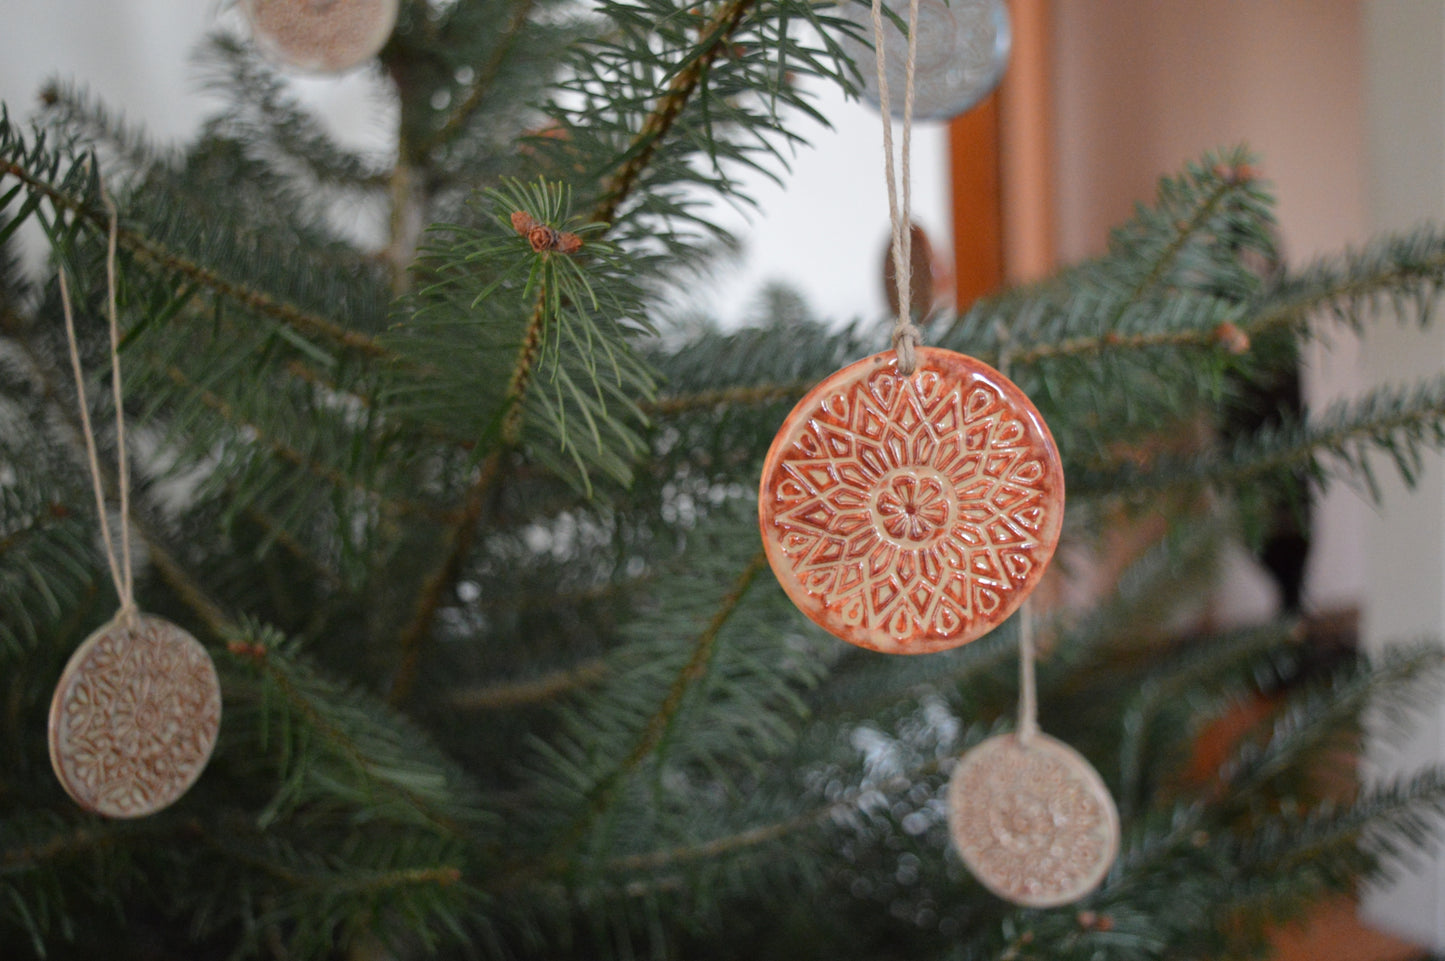 Earthy Christmas ornaments // ceramic decorations - set of 5